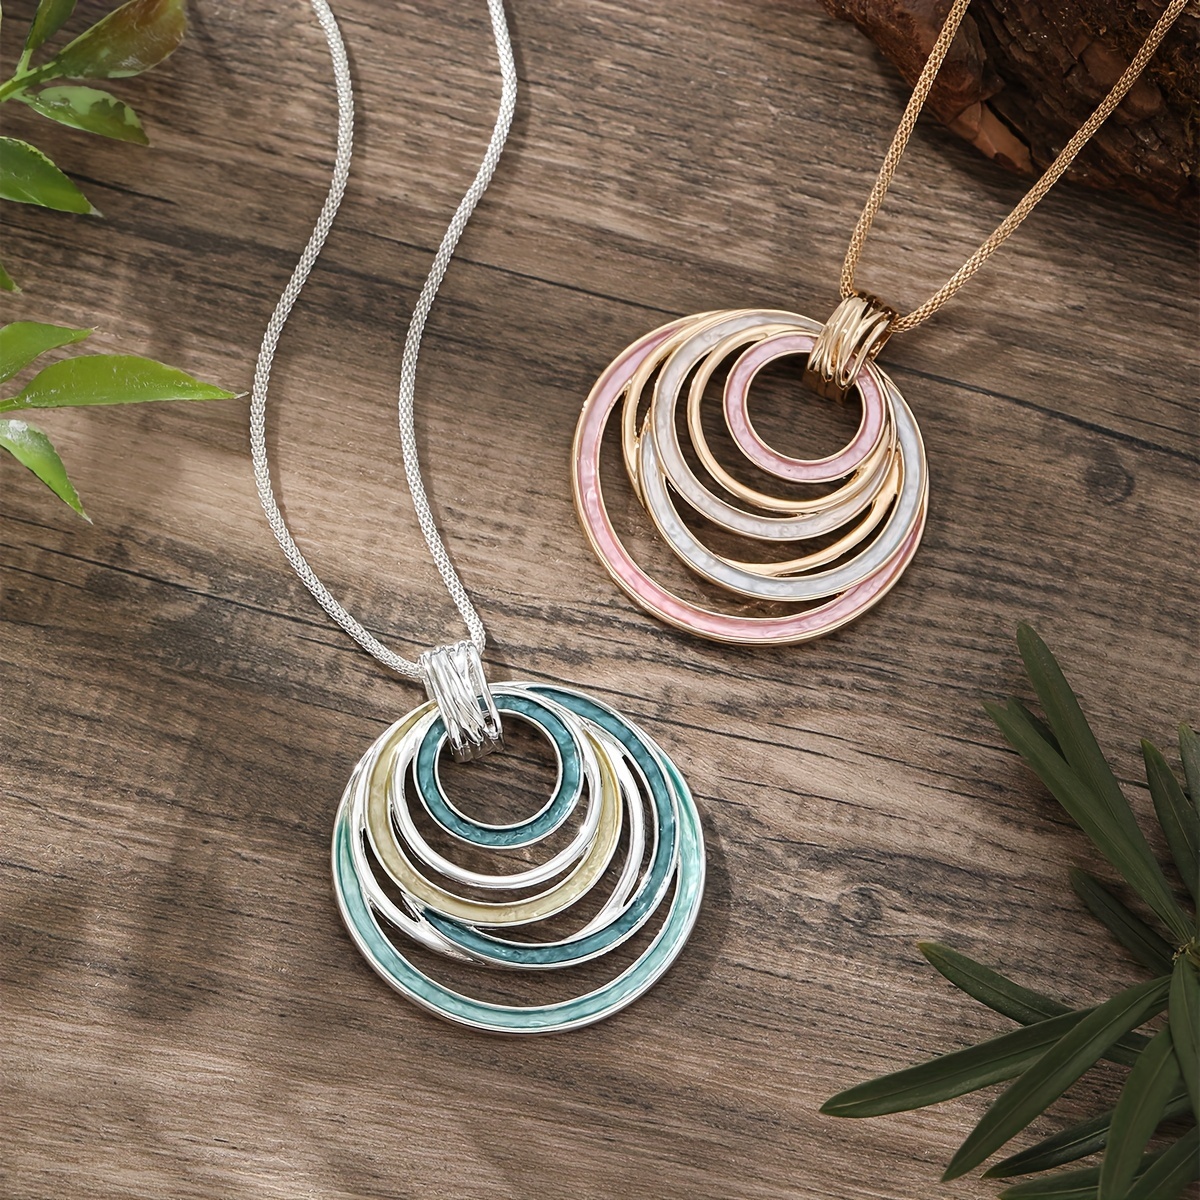 

Elegant Boho-chic Enamel Hollow Circle Pendant Necklace - Zinc Alloy, Lead-free & Nickel-free For Women | Perfect For Summer Vacations & Everyday Wear